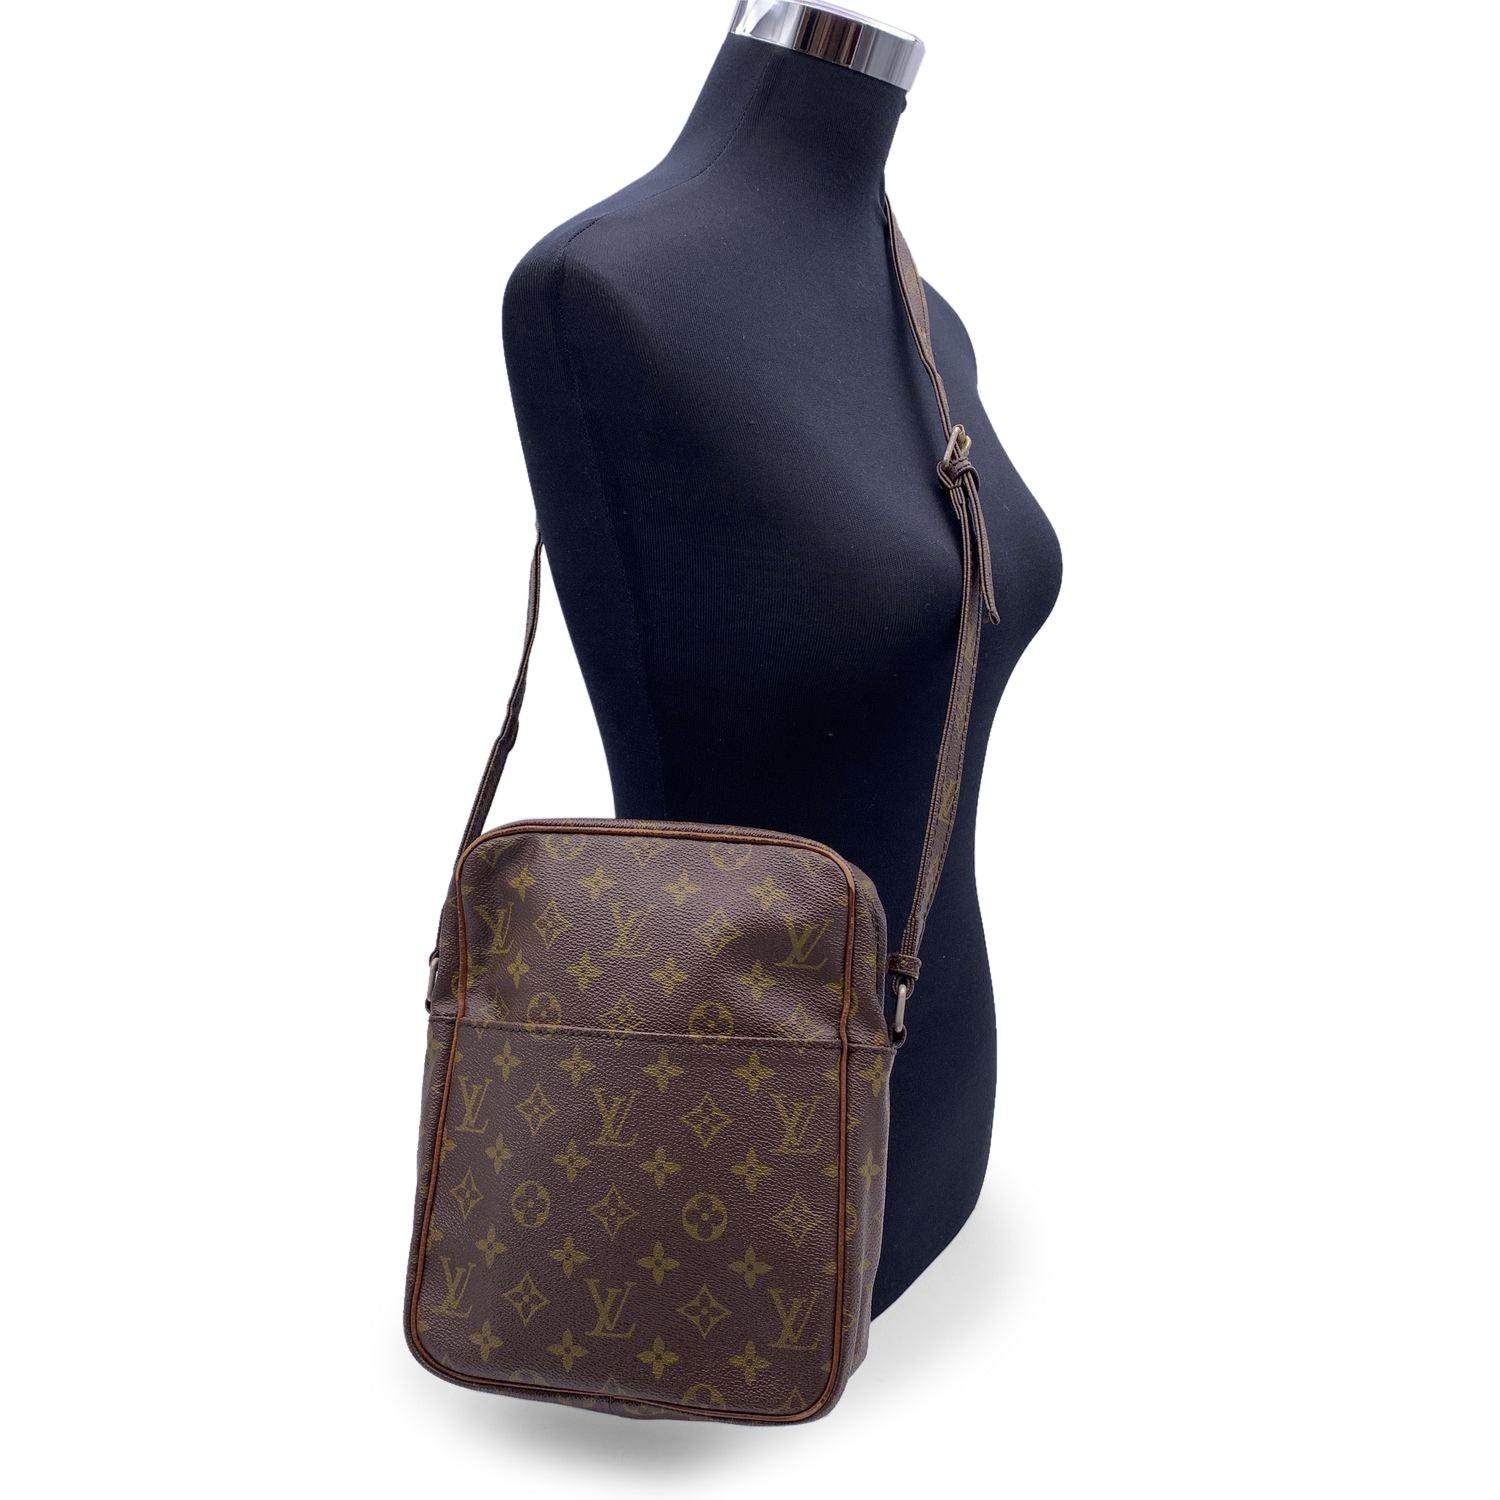 LOUIS VUITTON Vintage monogram canvas Marceau PM crafted in timeless monogram canvas with leather trim. It features 1 open pocket on the front. Adjustable canvas shoulder strap. Upper zip closure. Leather lining. 'LOUIS VUITTON Paris - made in